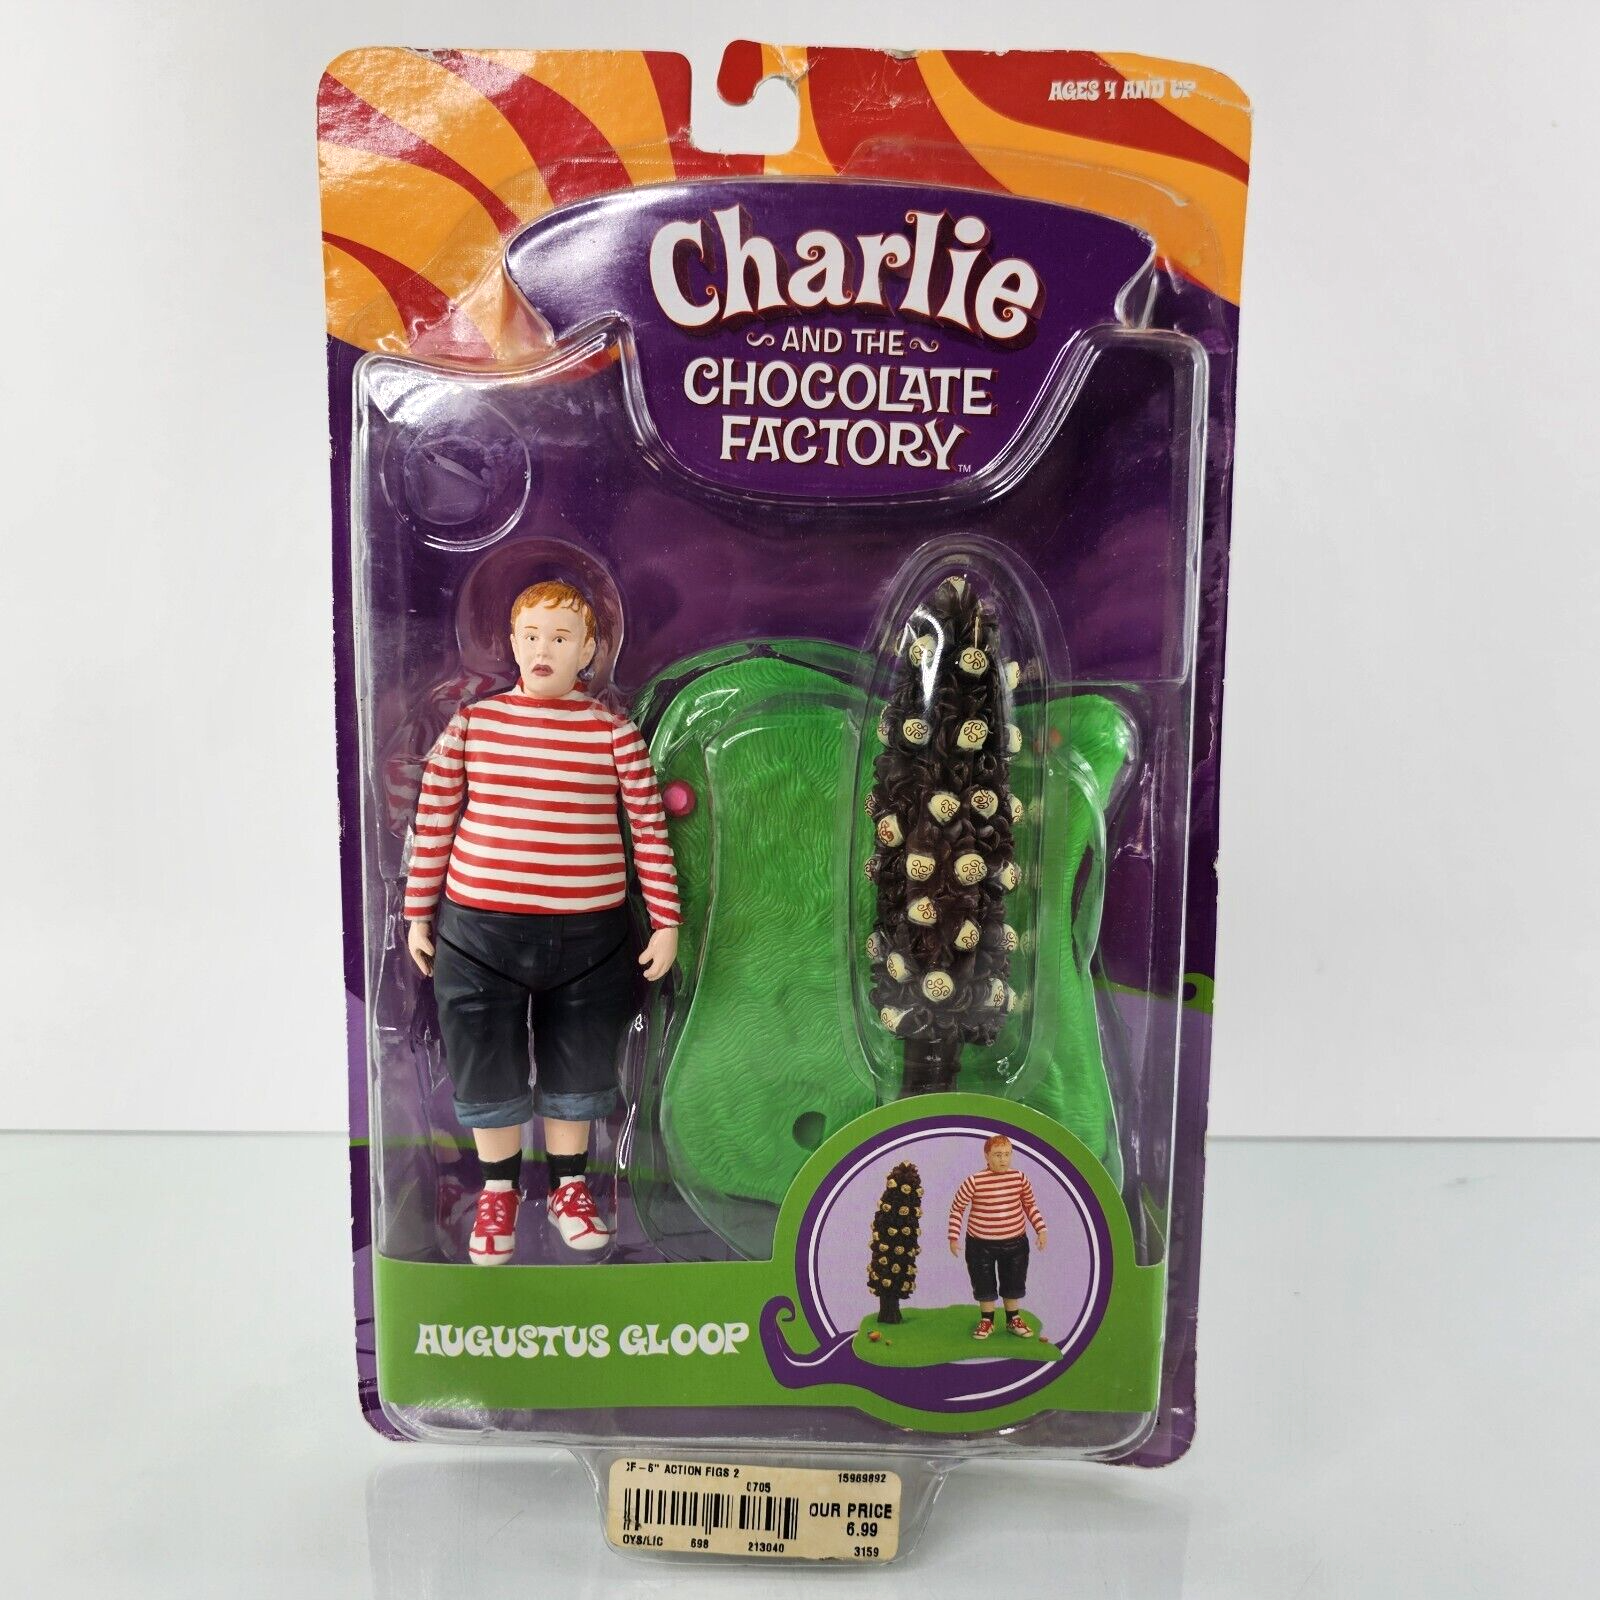 AUGUSTUS GLOOP Charlie & The Chocolate Factory Figure Willy Wonka Candy RARE NEW Medicom Toy